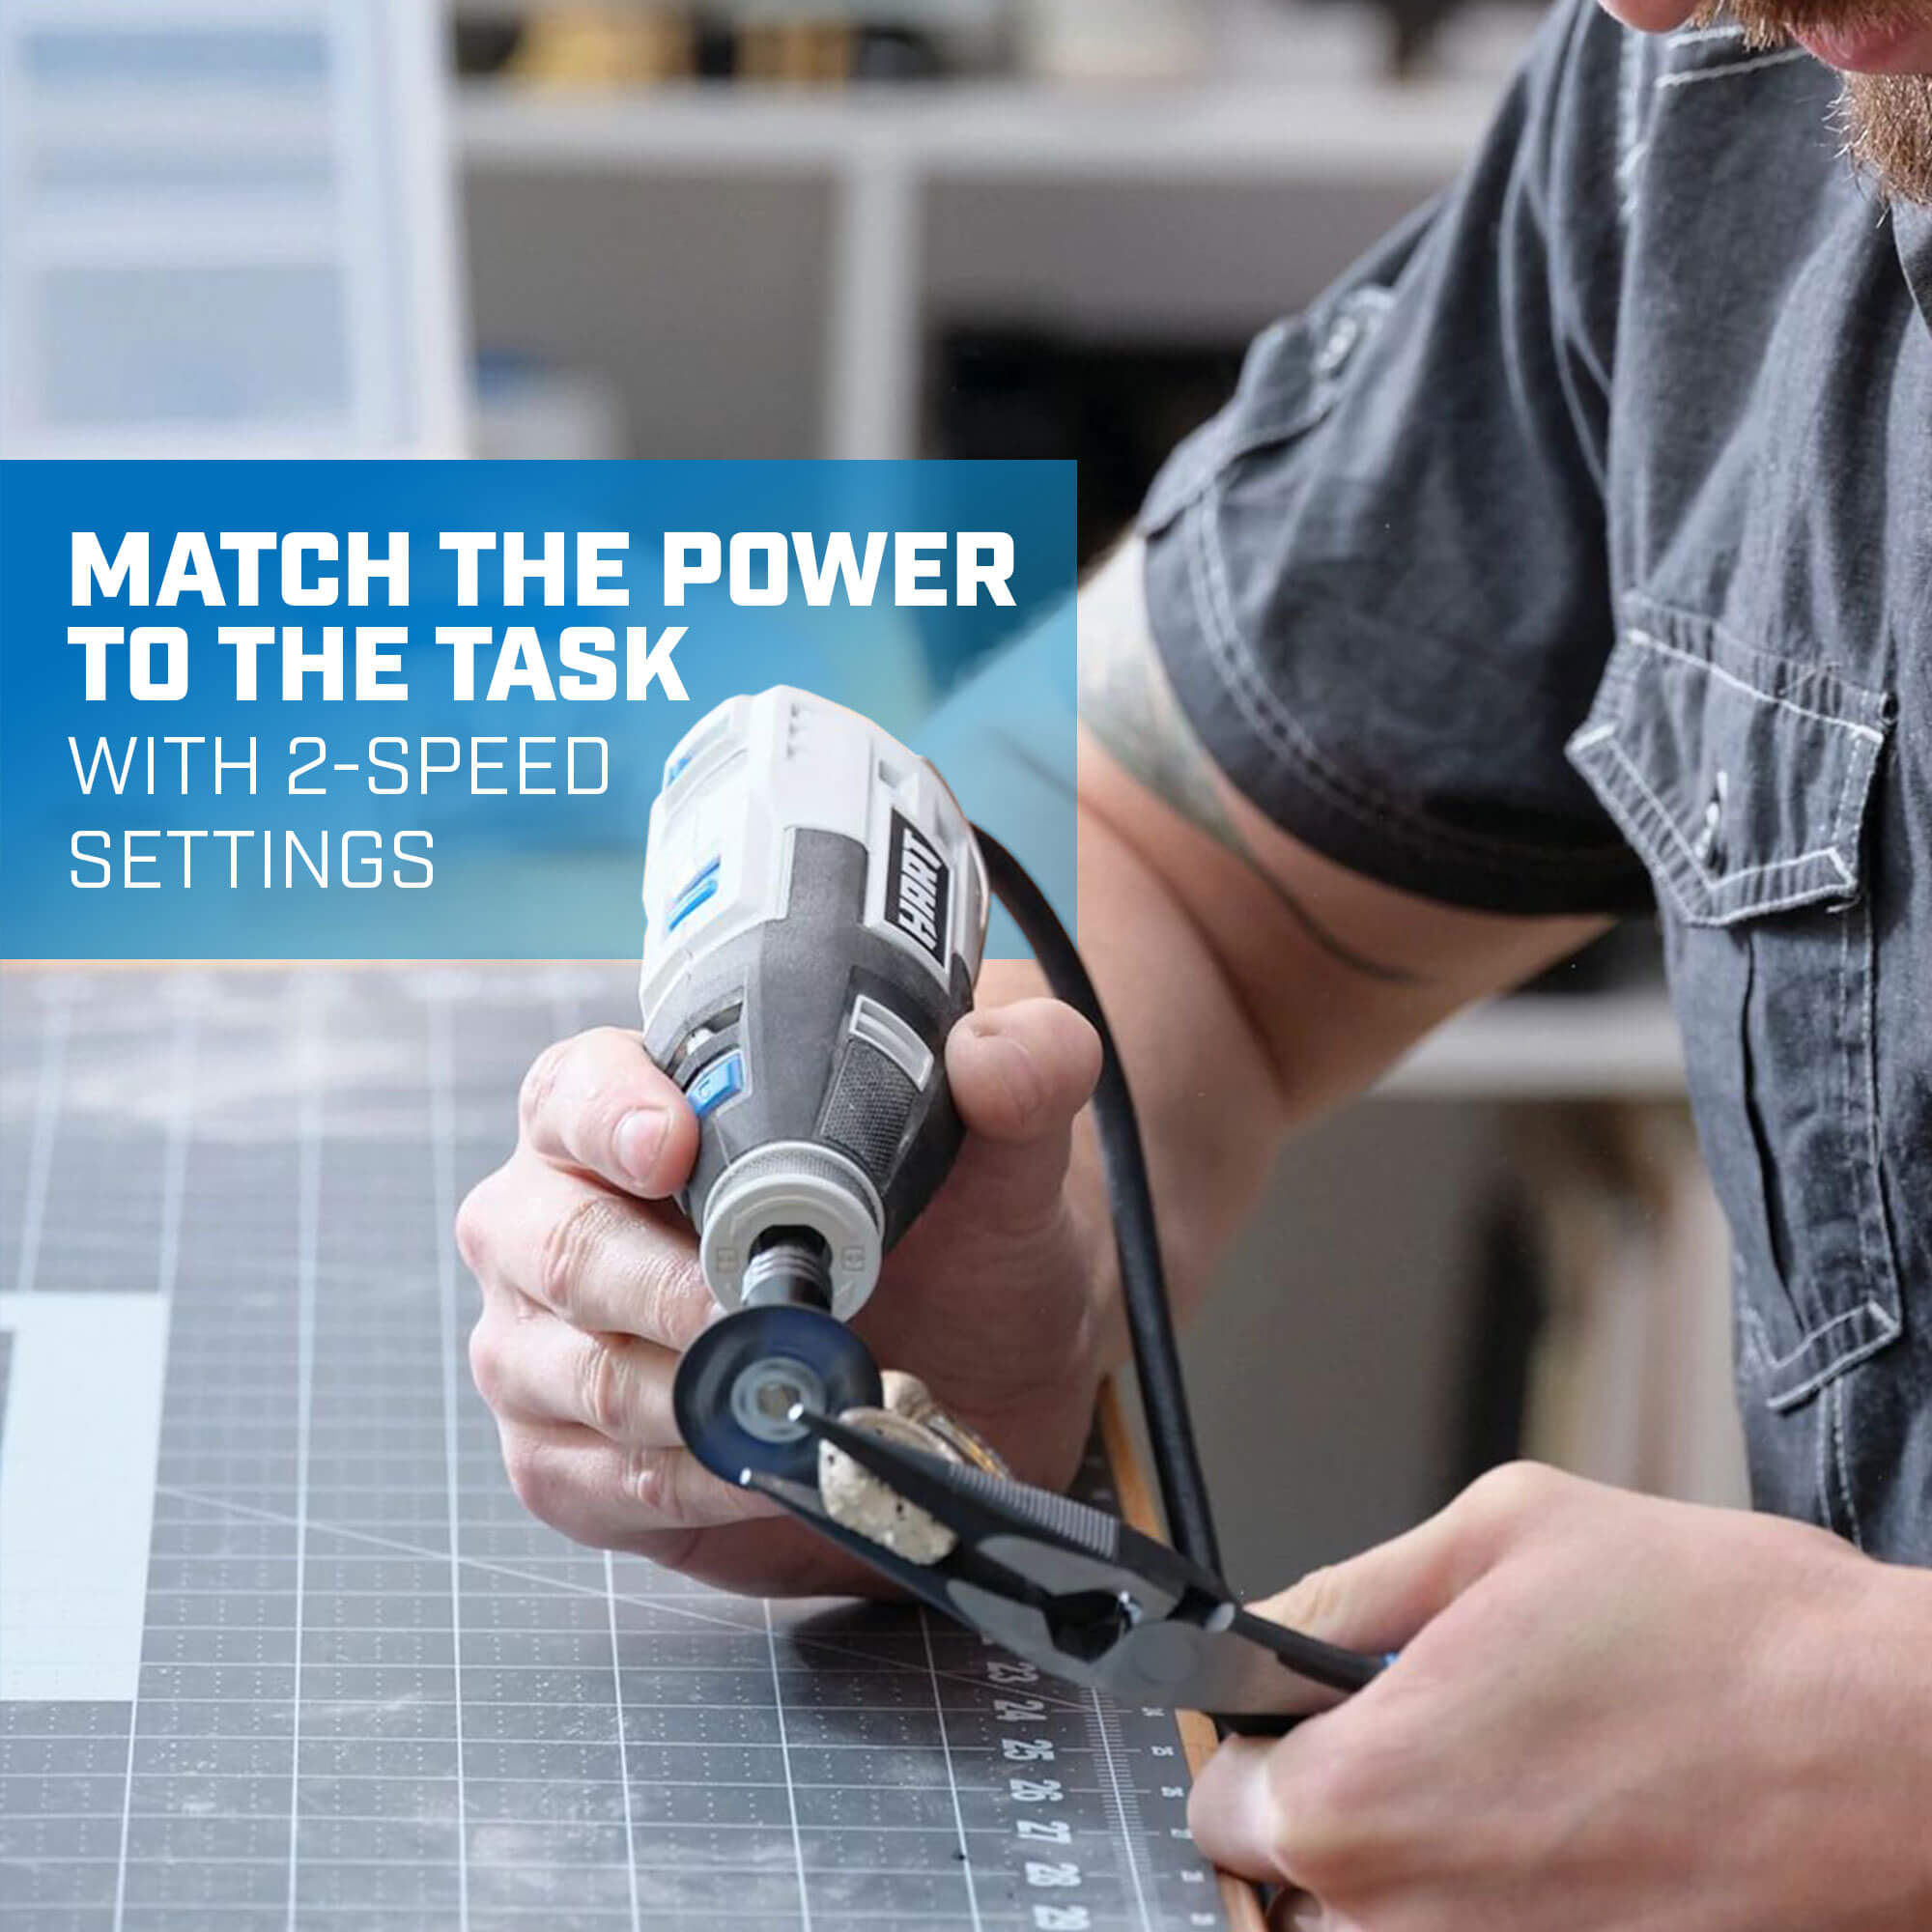 Match the power to the task with 2-speed settings